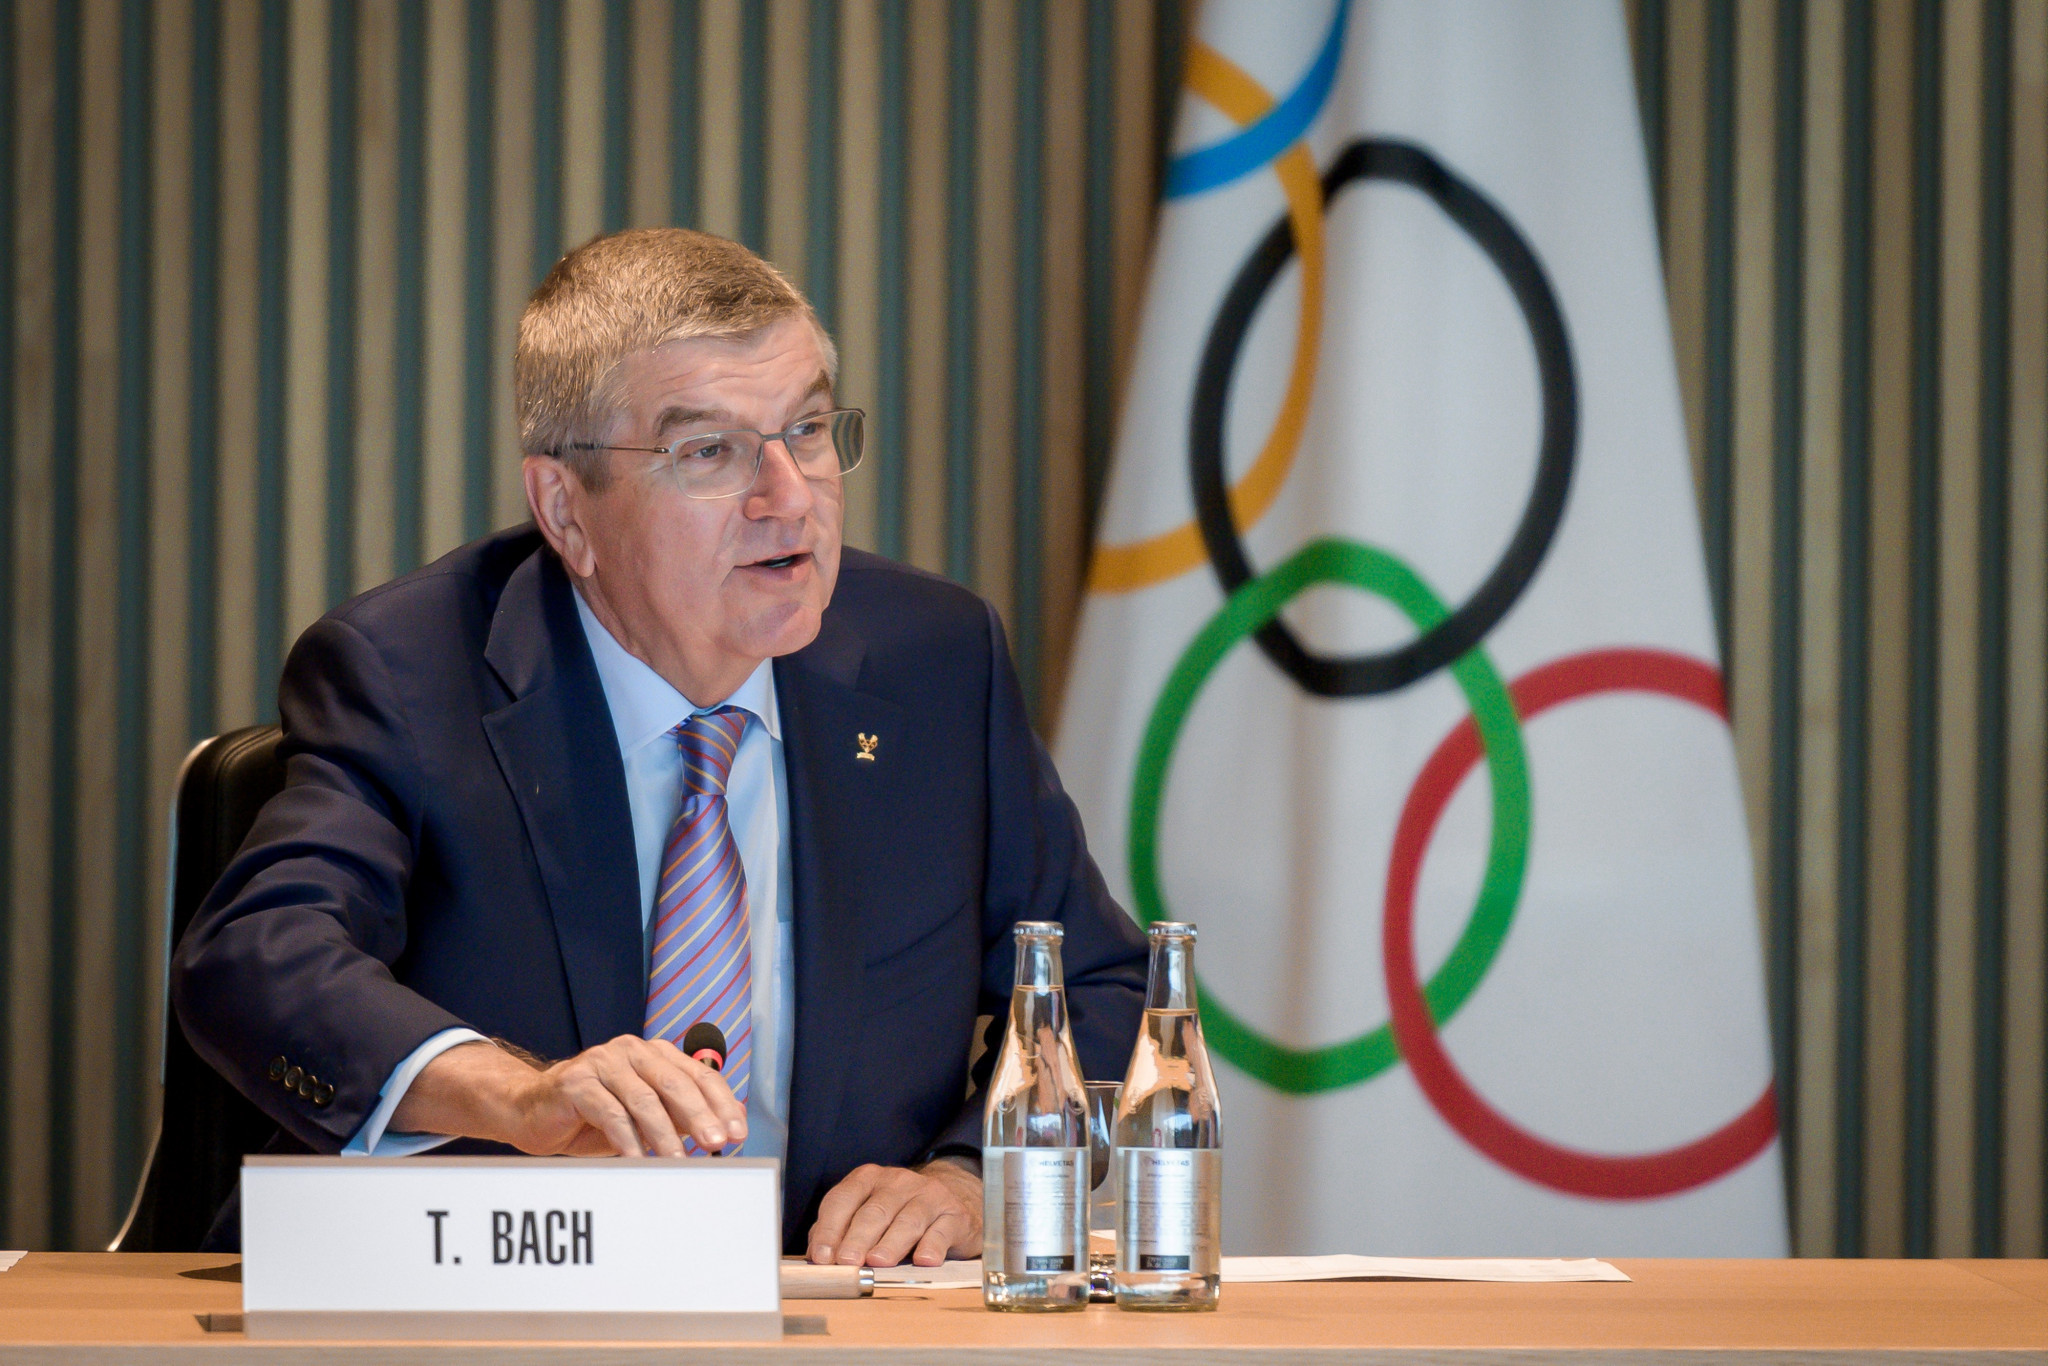 Thomas Bach made two announcements which could have long-term impacts ©Getty Images